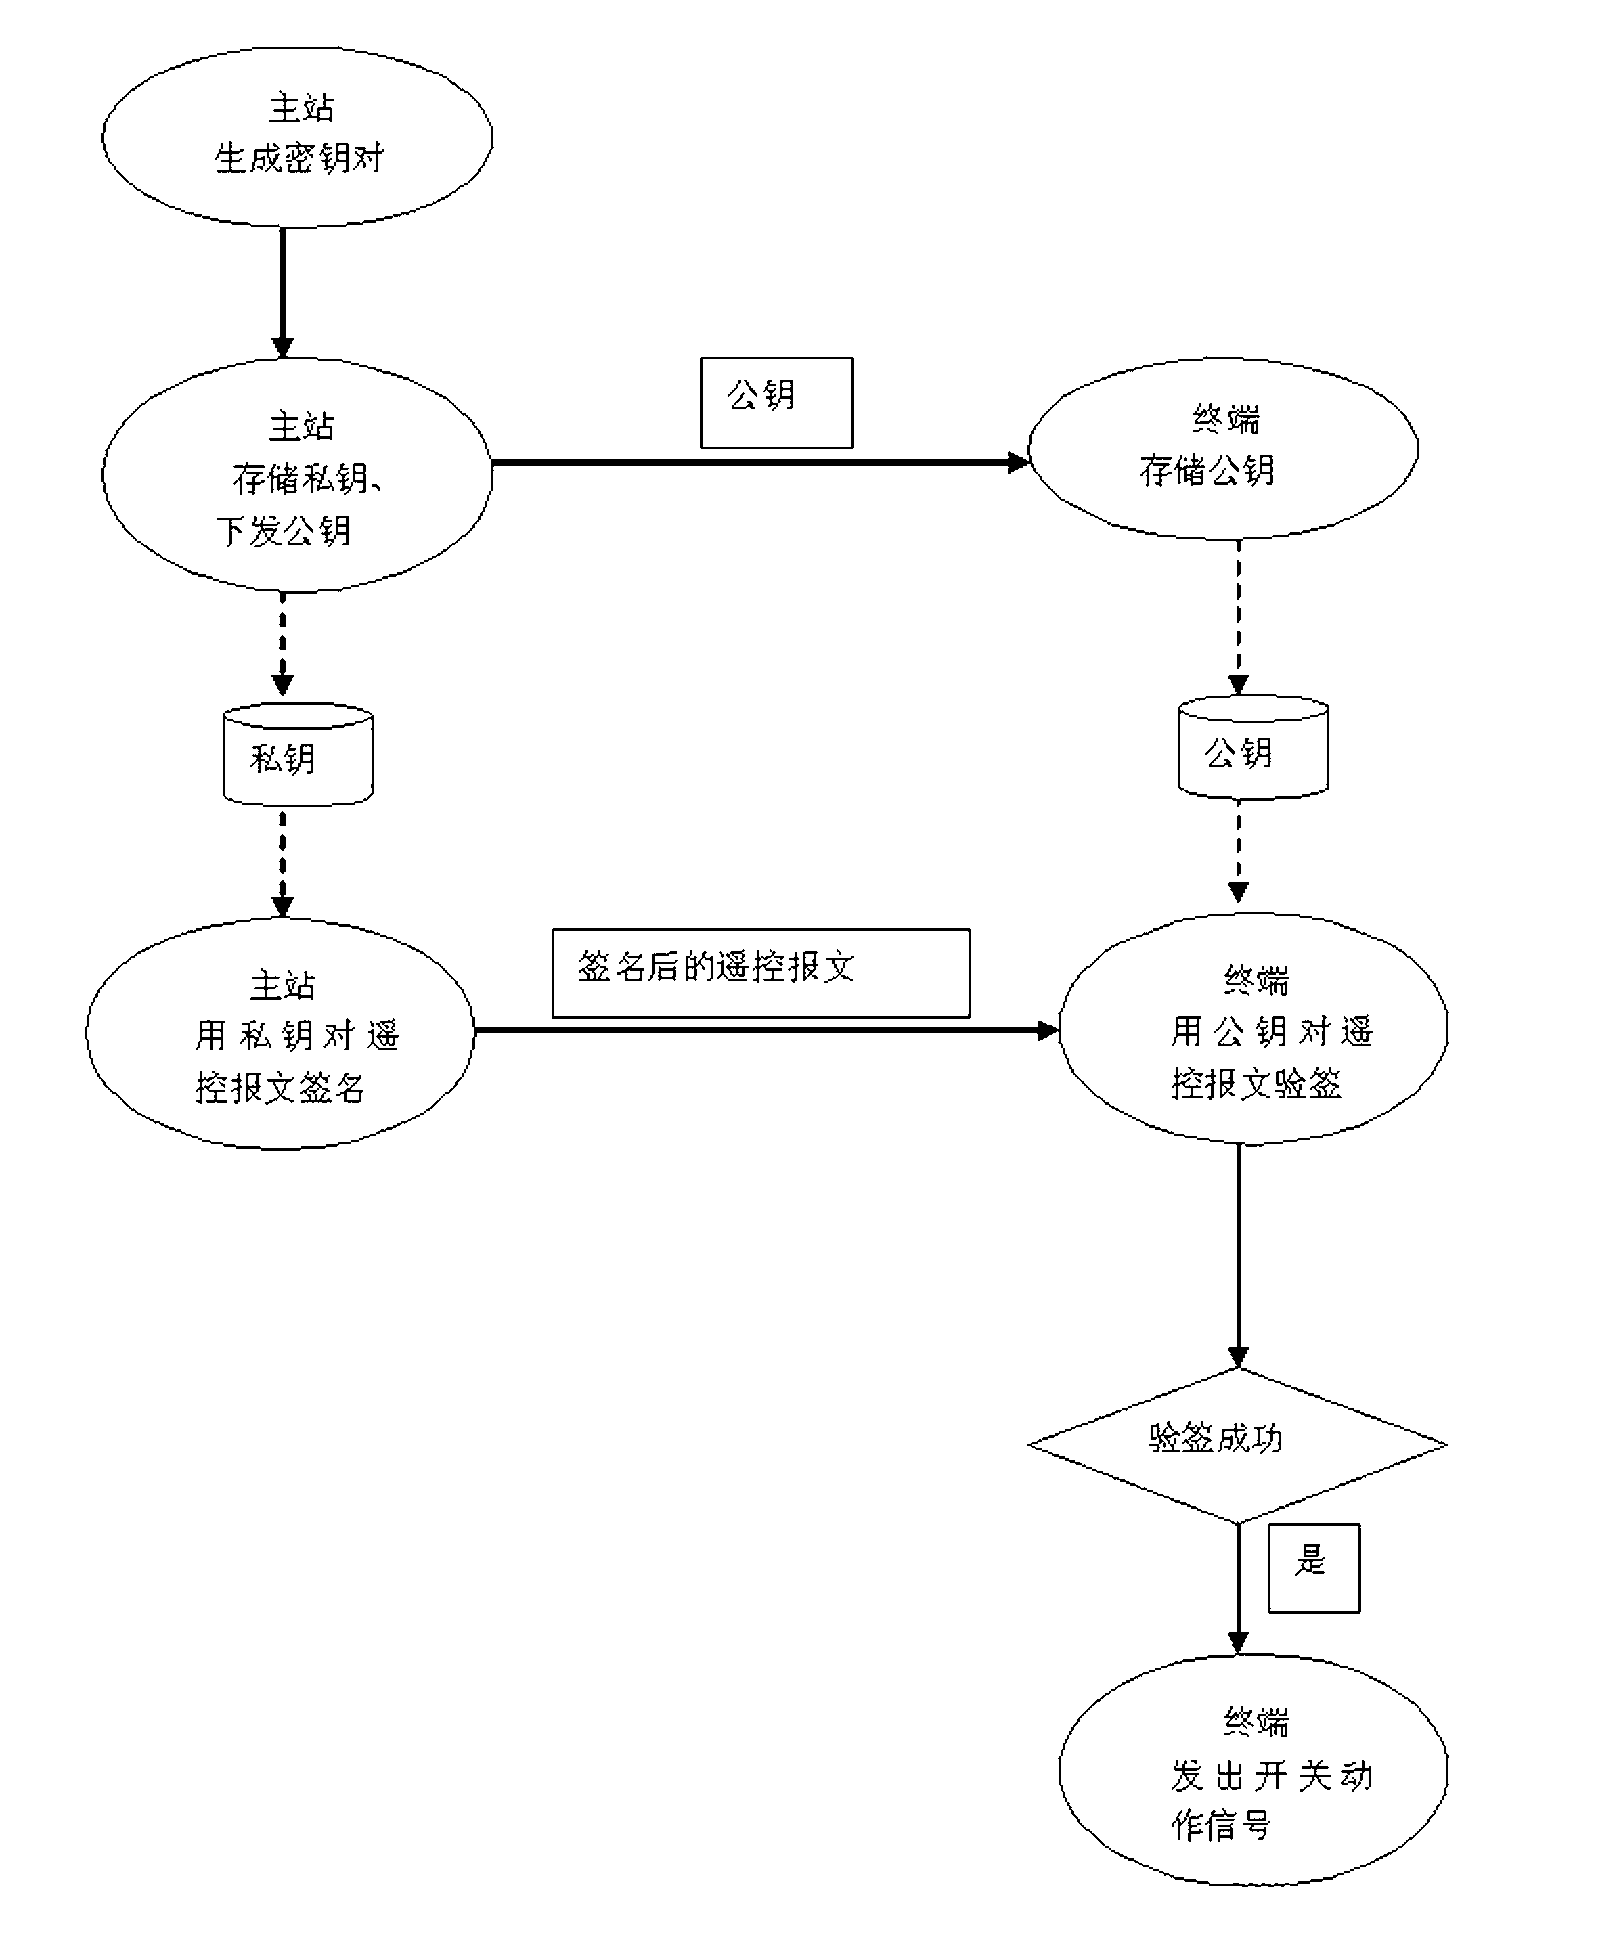 Method for realizing encrypted authentication of distribution automation remote control command